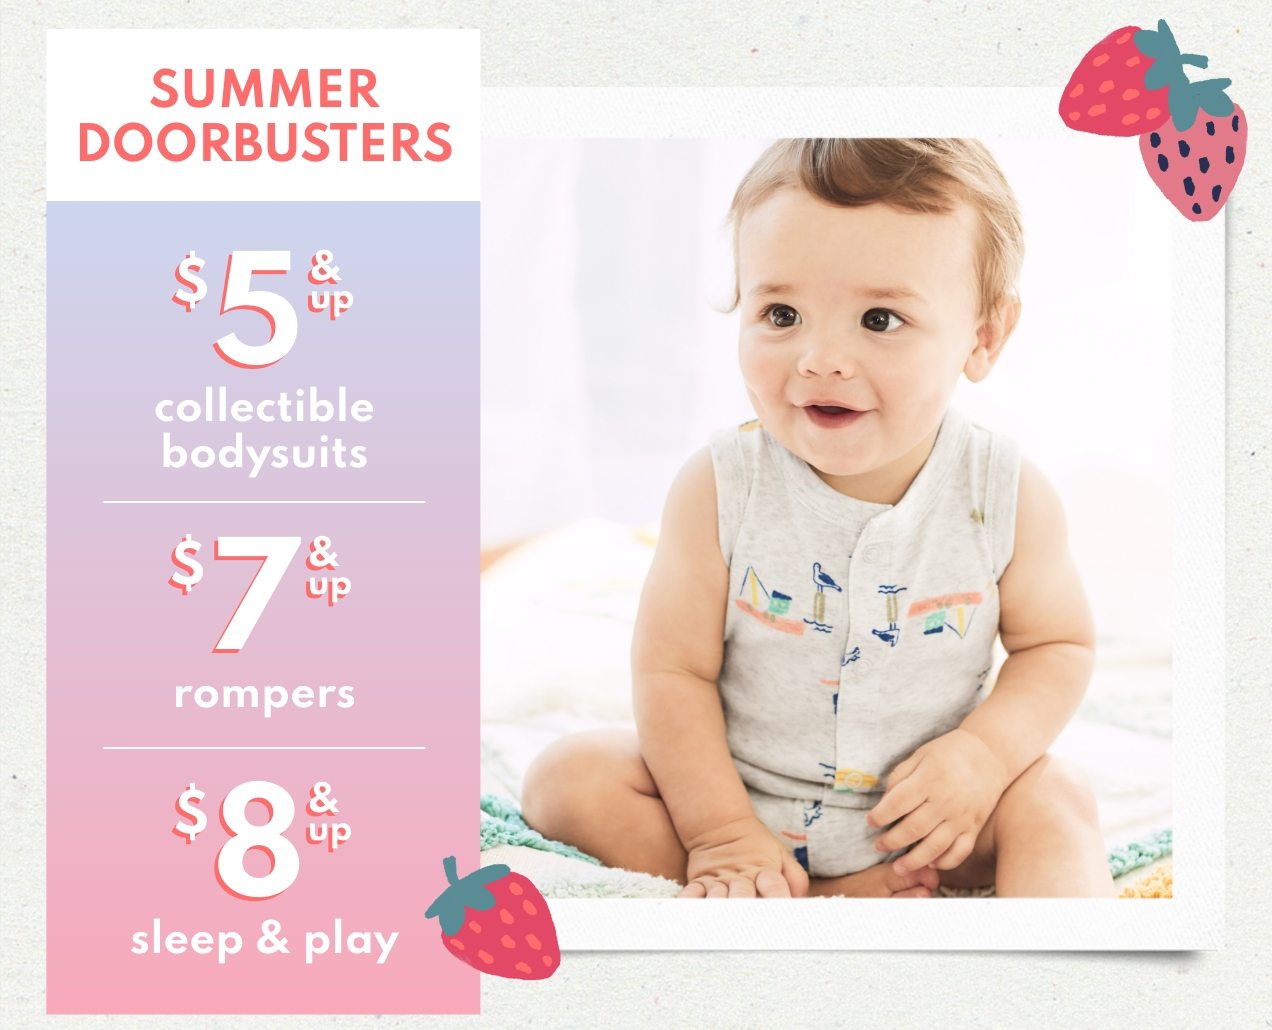 SUMMER DOORBUSTERS | $5 & up collectible bodysuits | $7 & up rompers | $8 & up sleep & play 